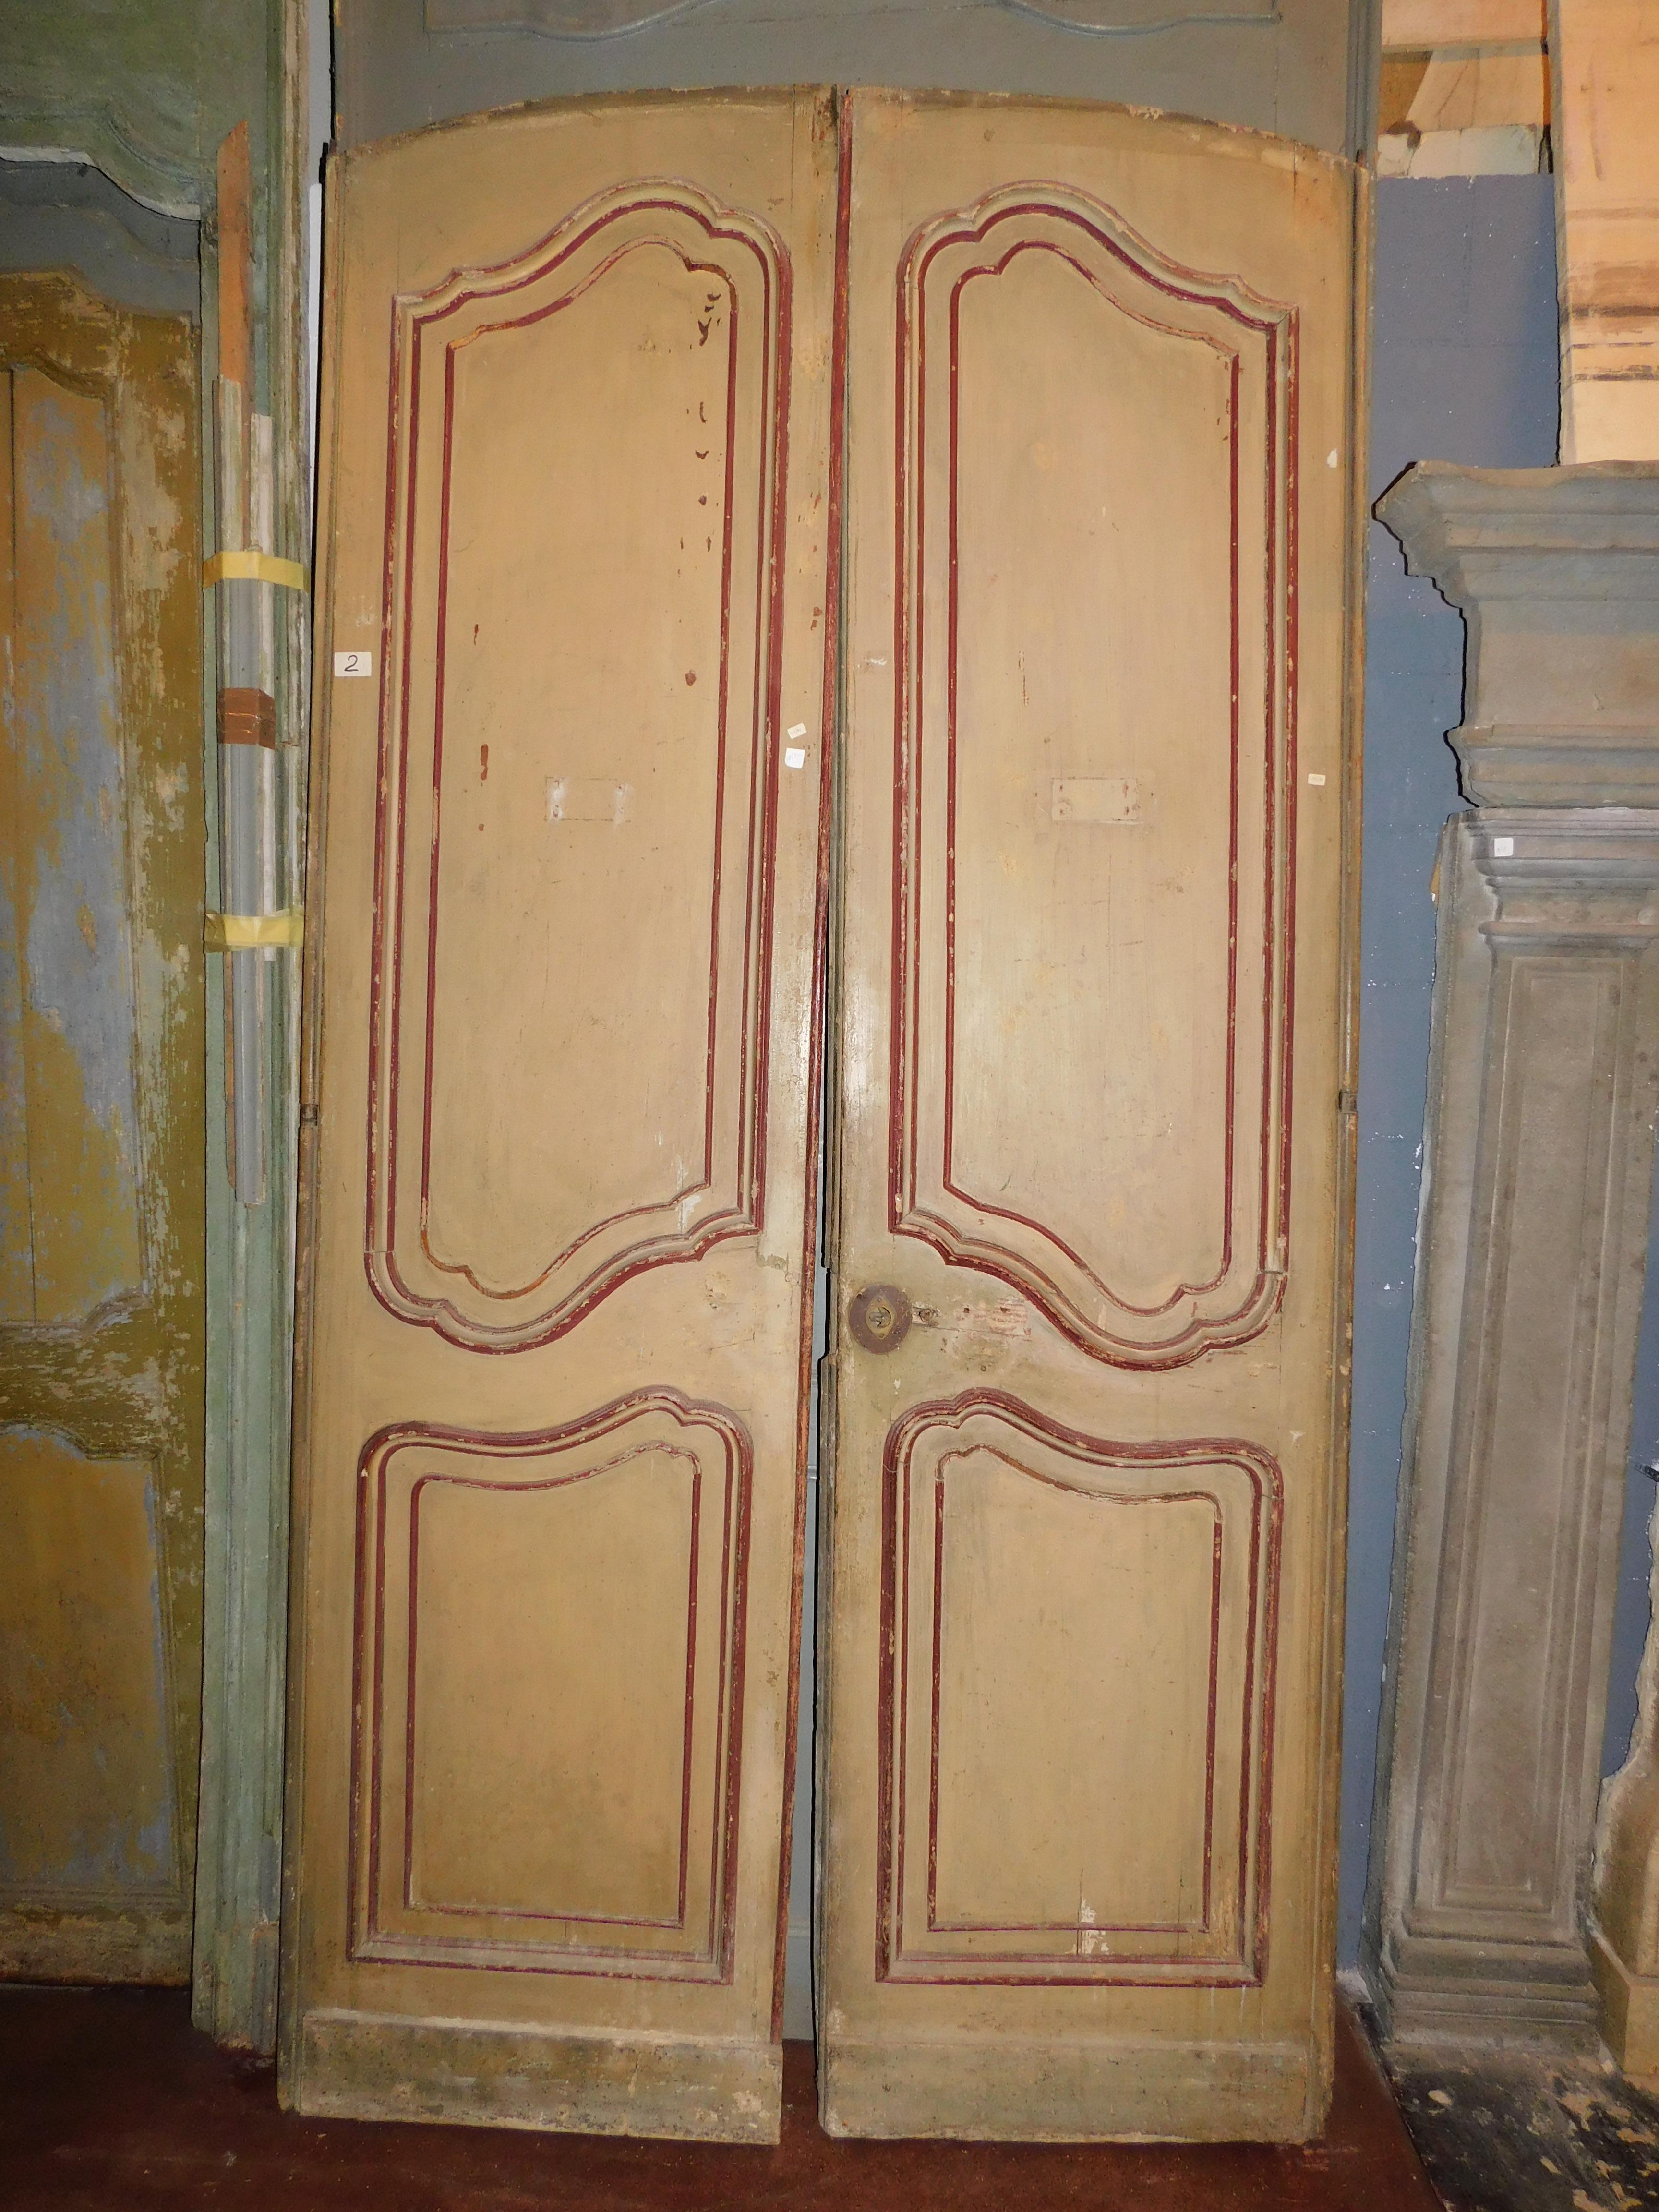 Antique double doors, in beige and red lacquered wood, also milled on the back and painted, beautiful on both sides, with a stondo on the top, were mounted with hinges at the top and bottom (floor), very beautiful and particular, perfect as interior